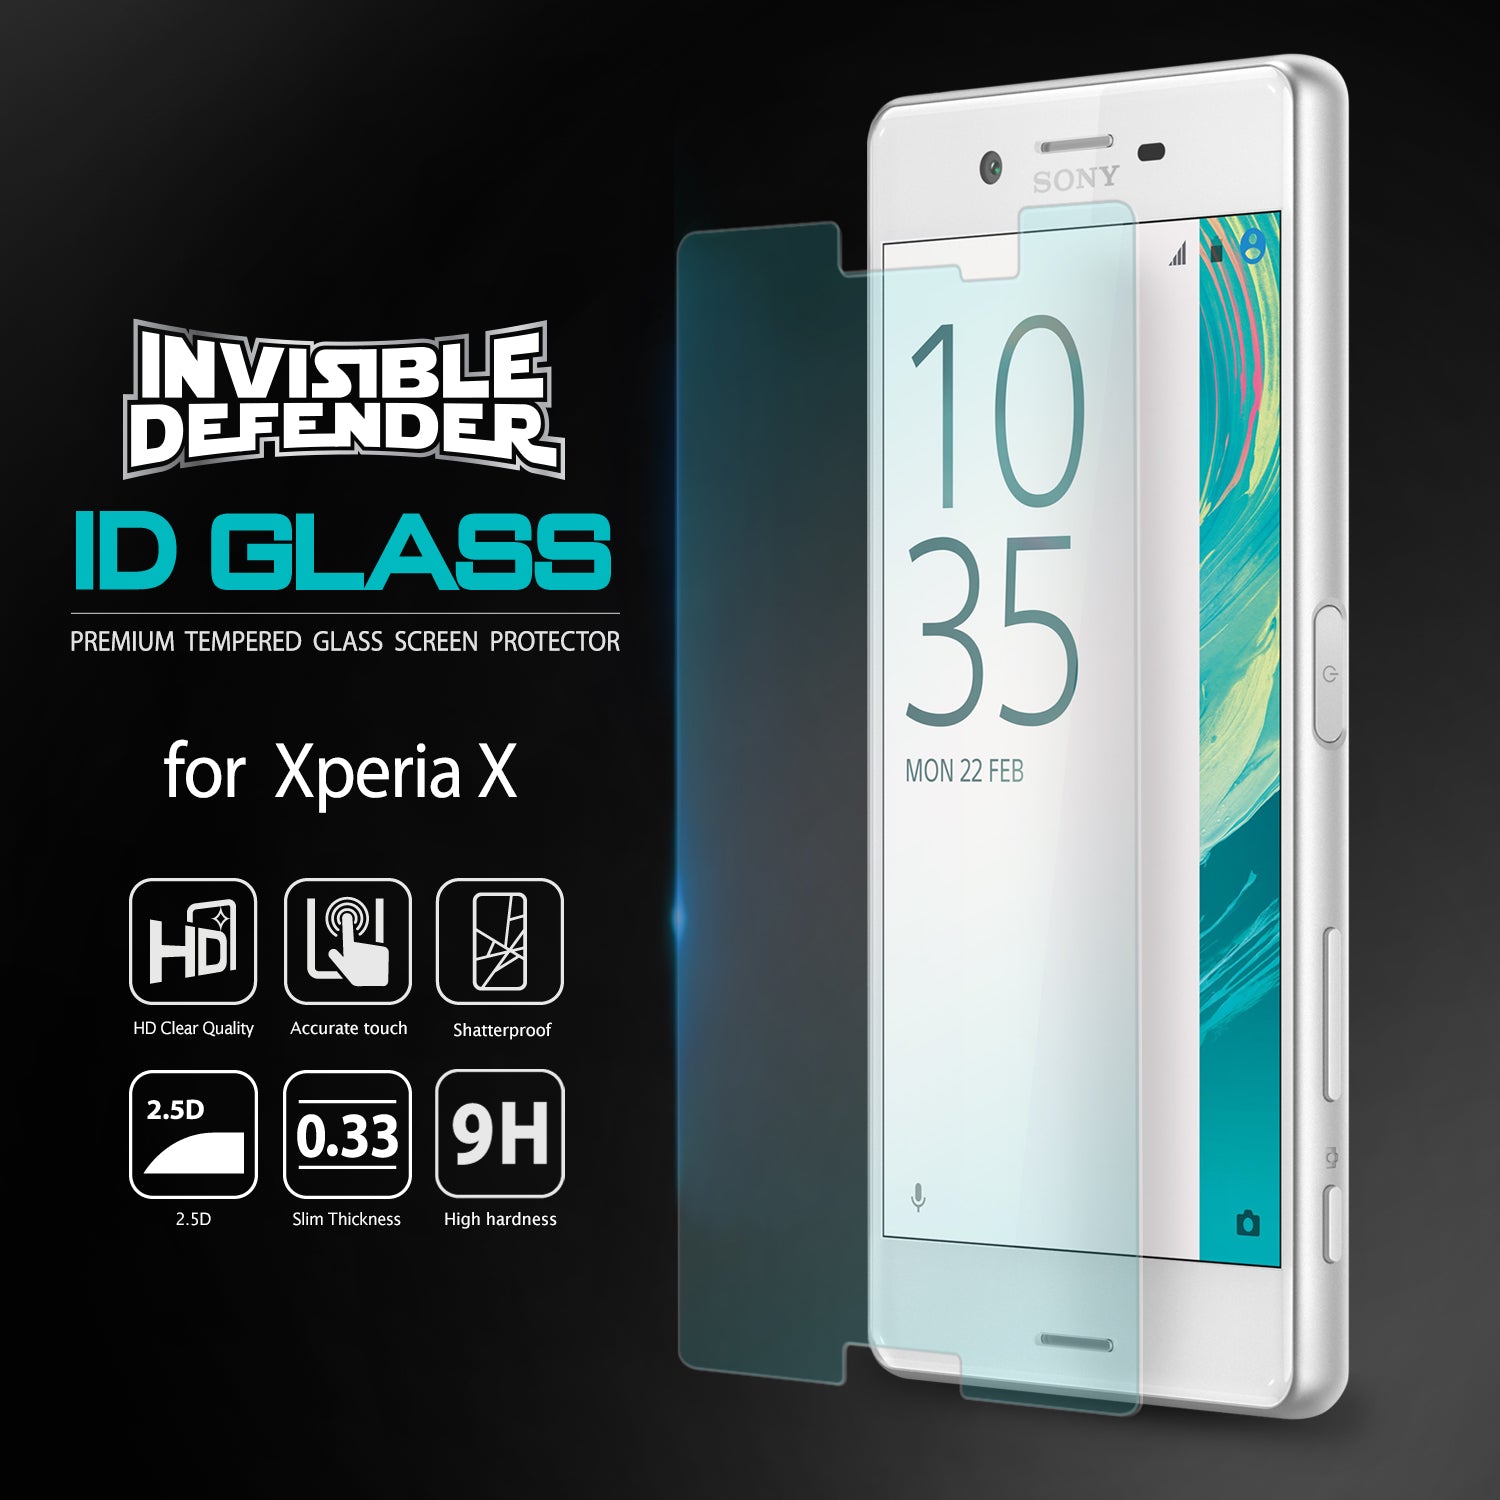 ringke invisible defender glass for xperia x